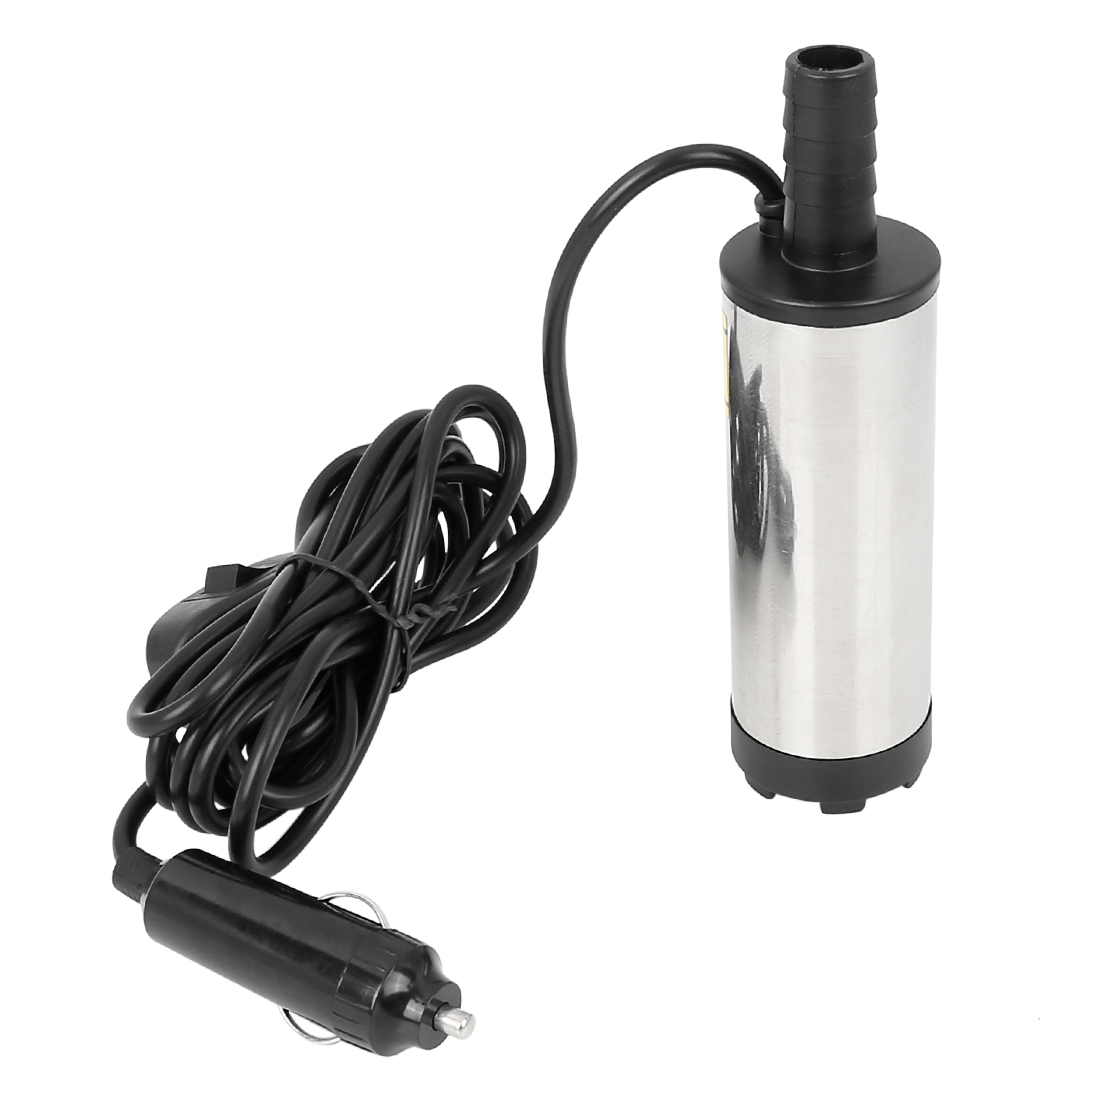 30L/min 12V/24V 38mm 51mm DC Electric Submersible Pump Stainless Steel Oil Pump Water Oil Diesel Fuel Transfer Refueling Tool